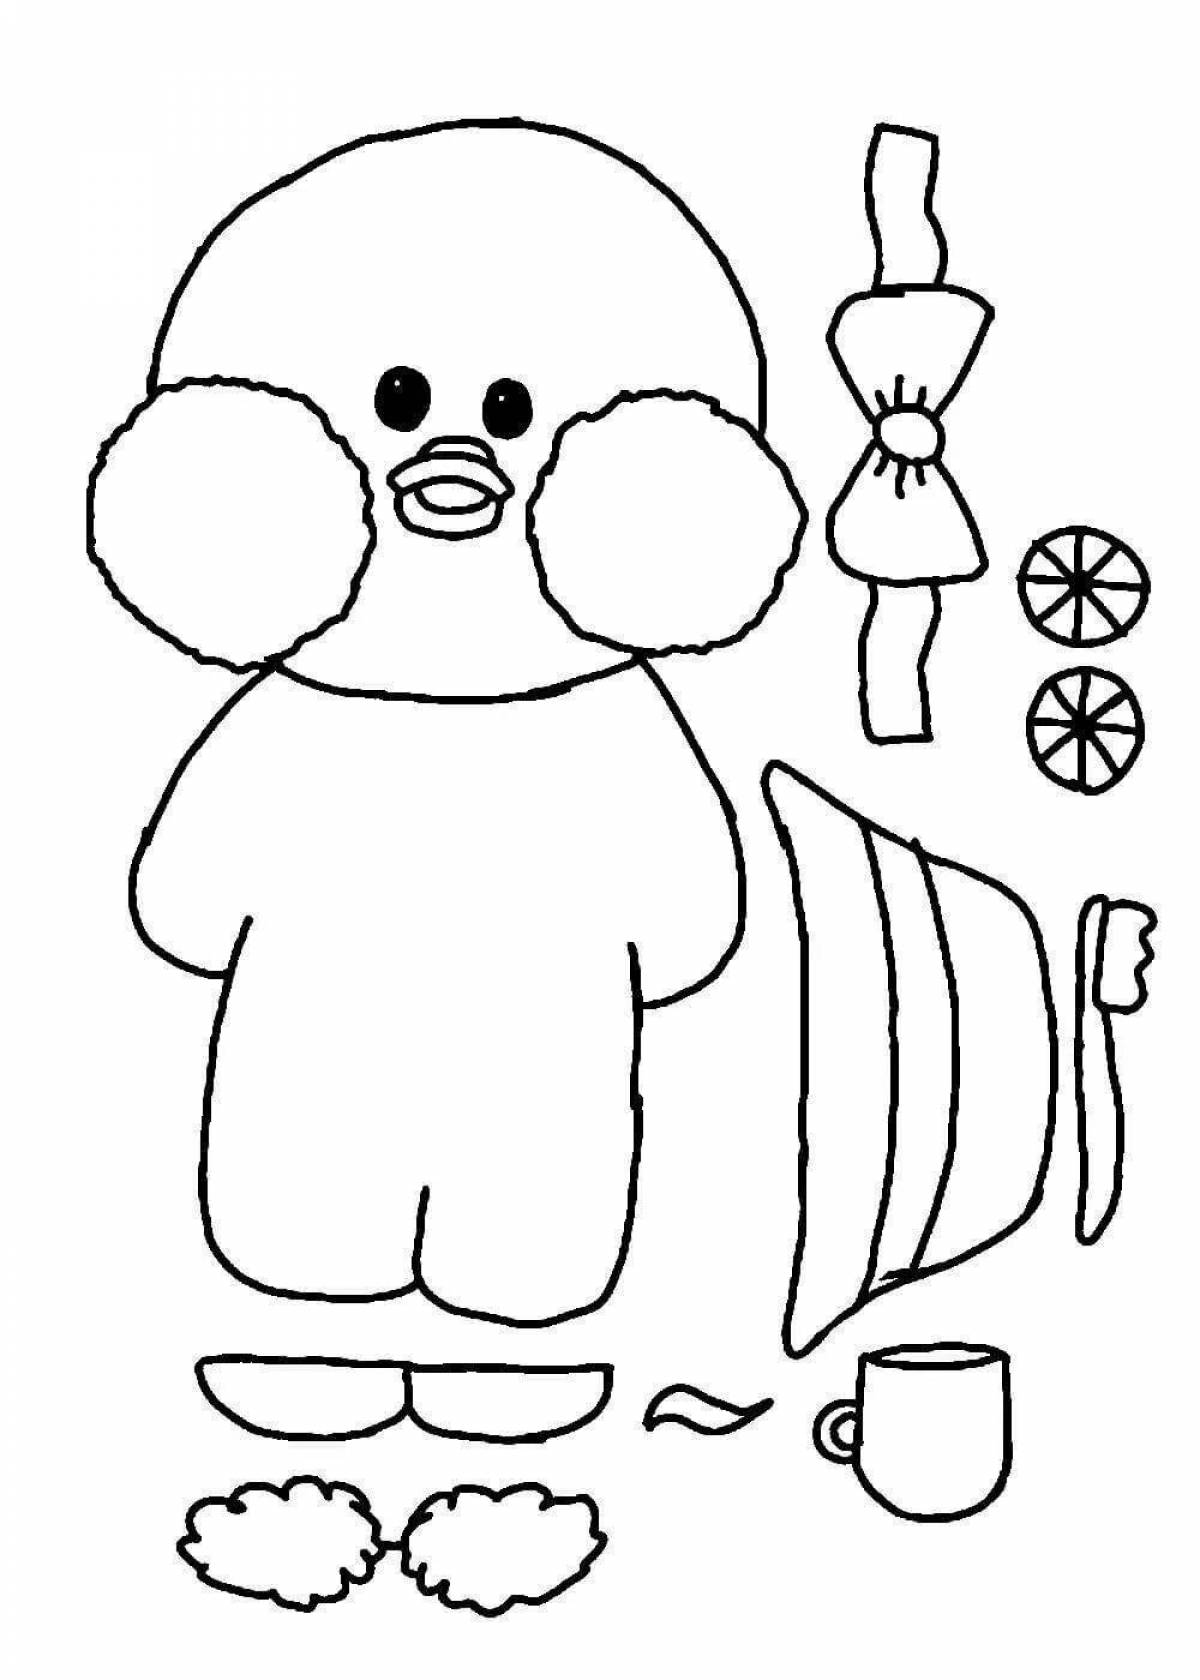 Gorgeous lalafanfan duck coloring pages for kids